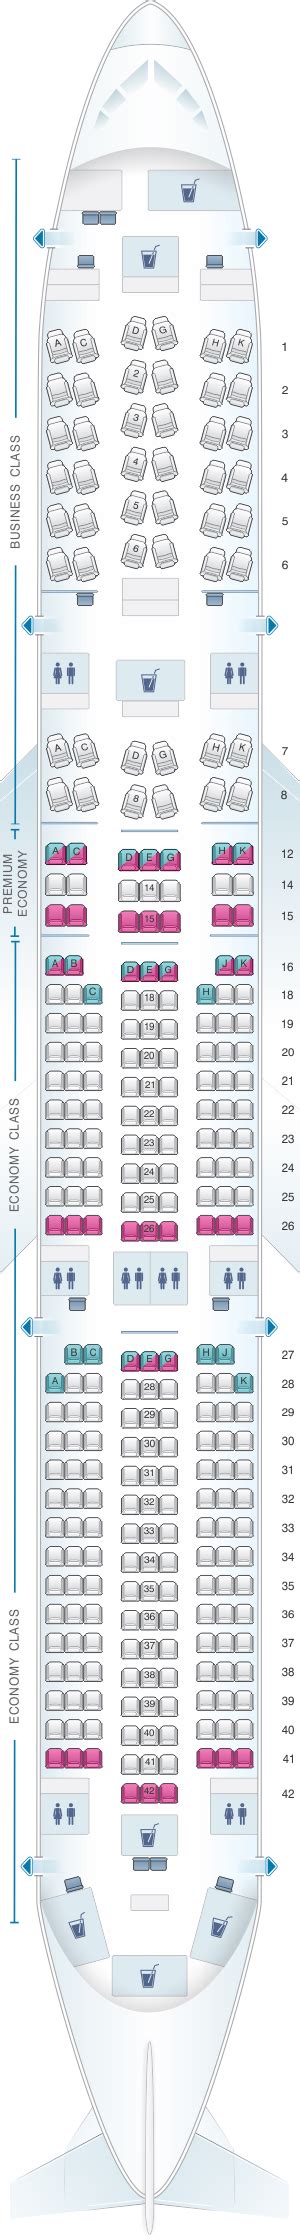 A350 900 Singapore Airlines Seat Map